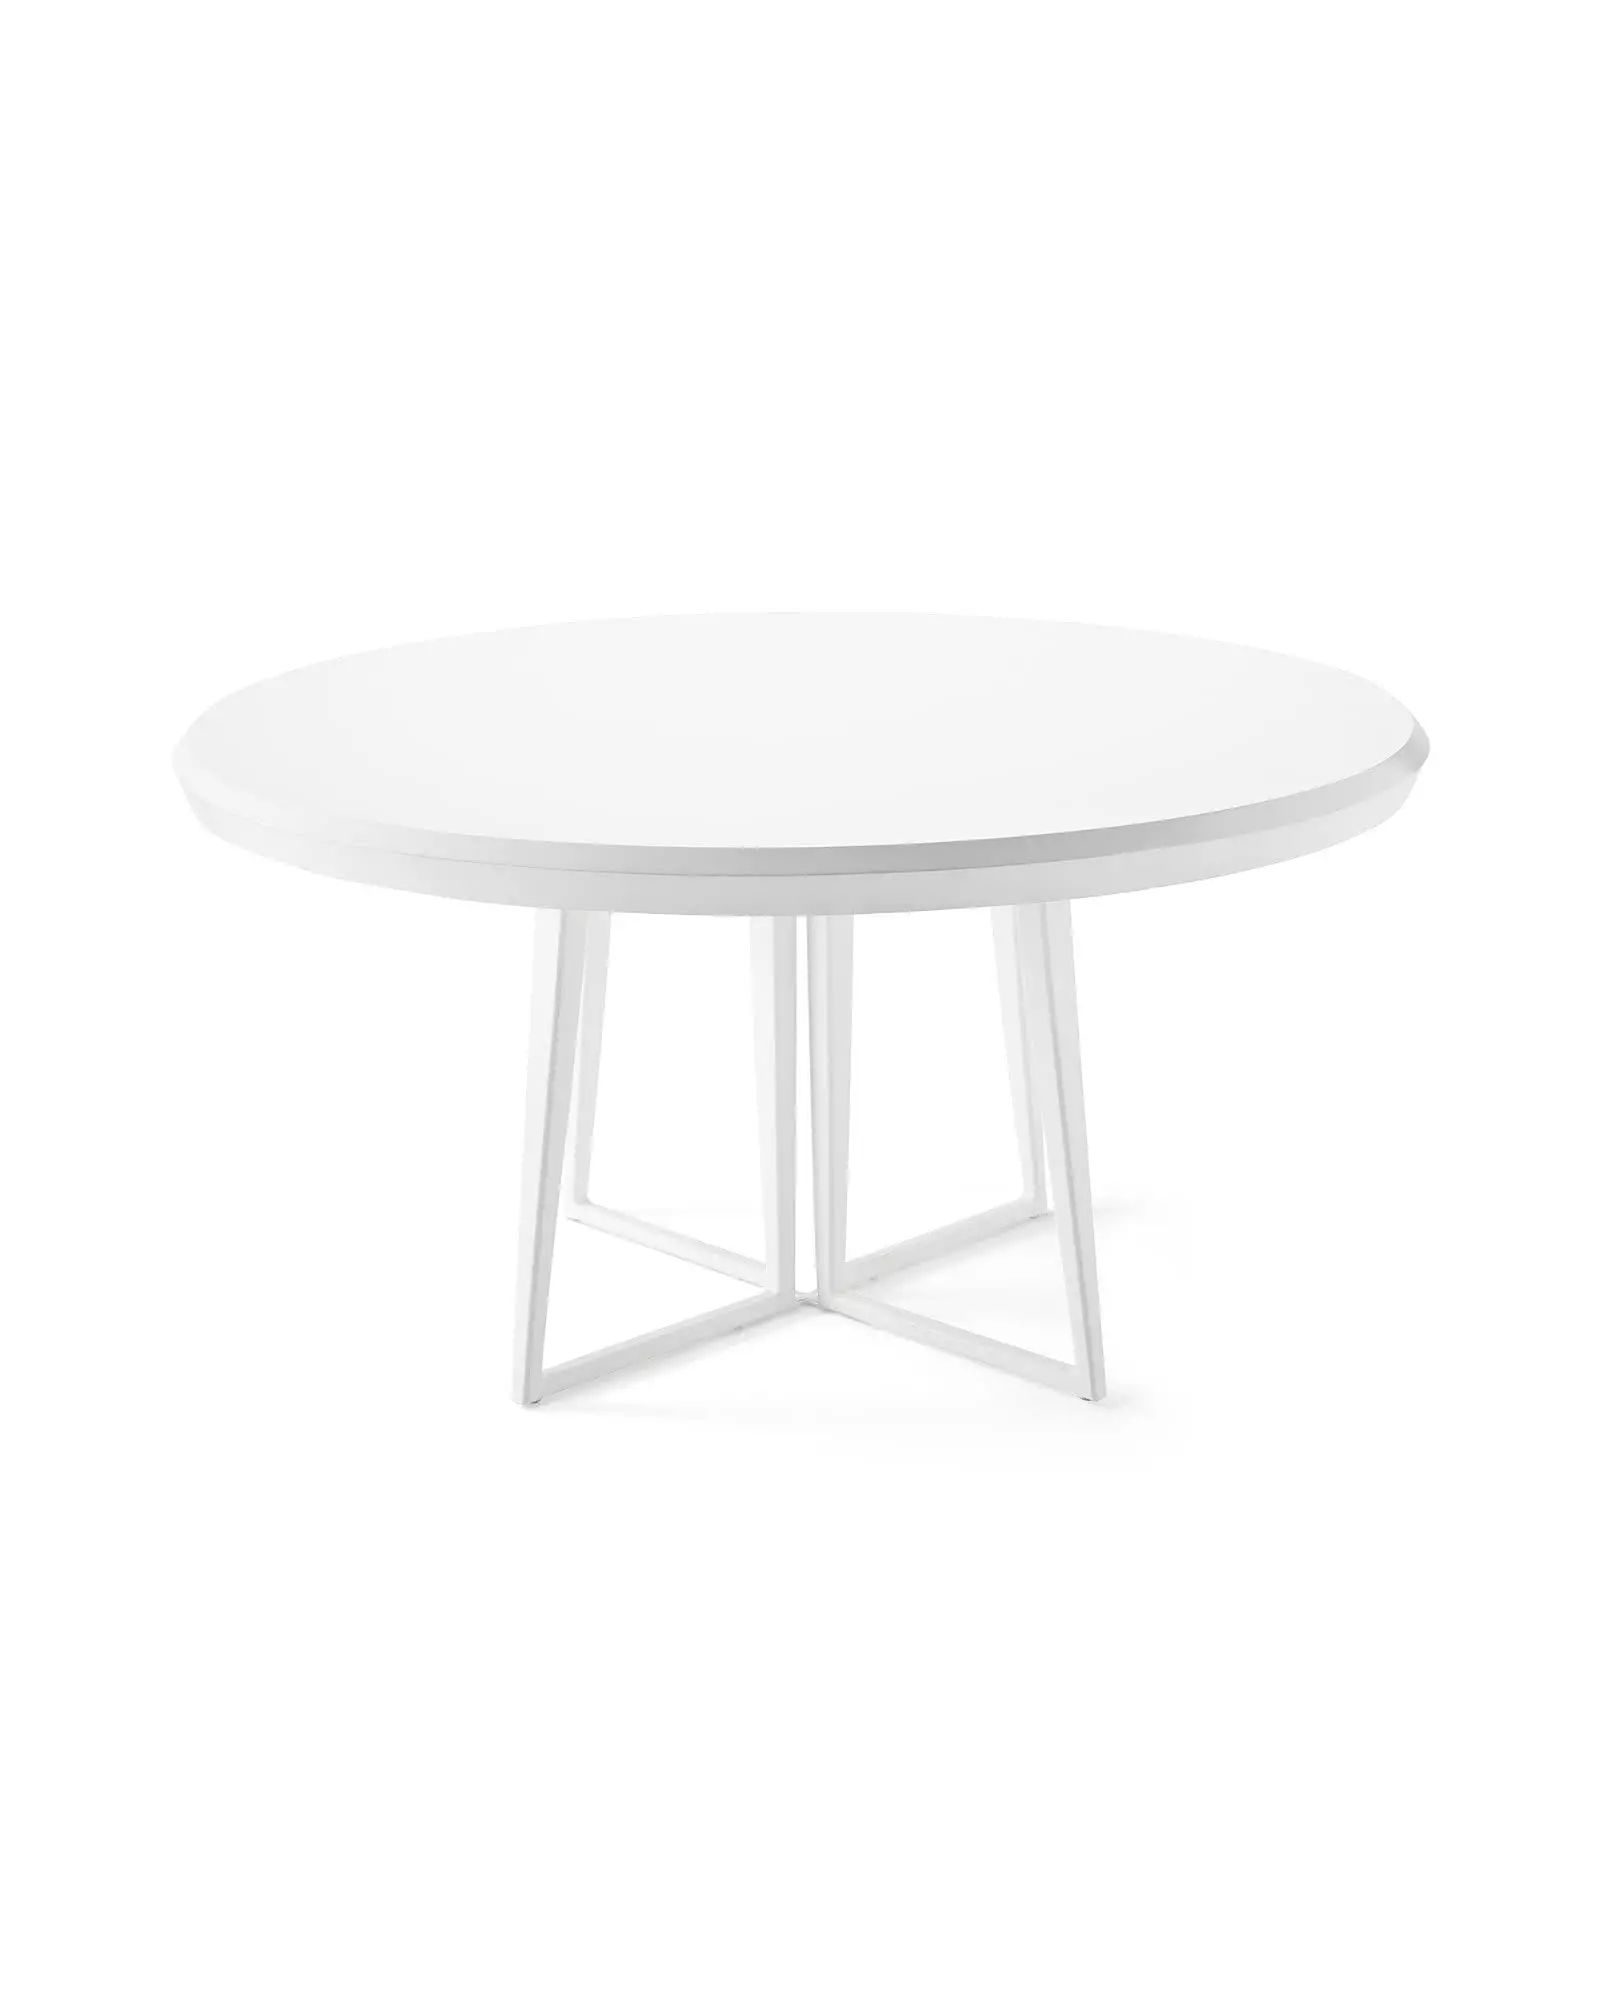 Downing 60" Round Dining Table | Serena and Lily